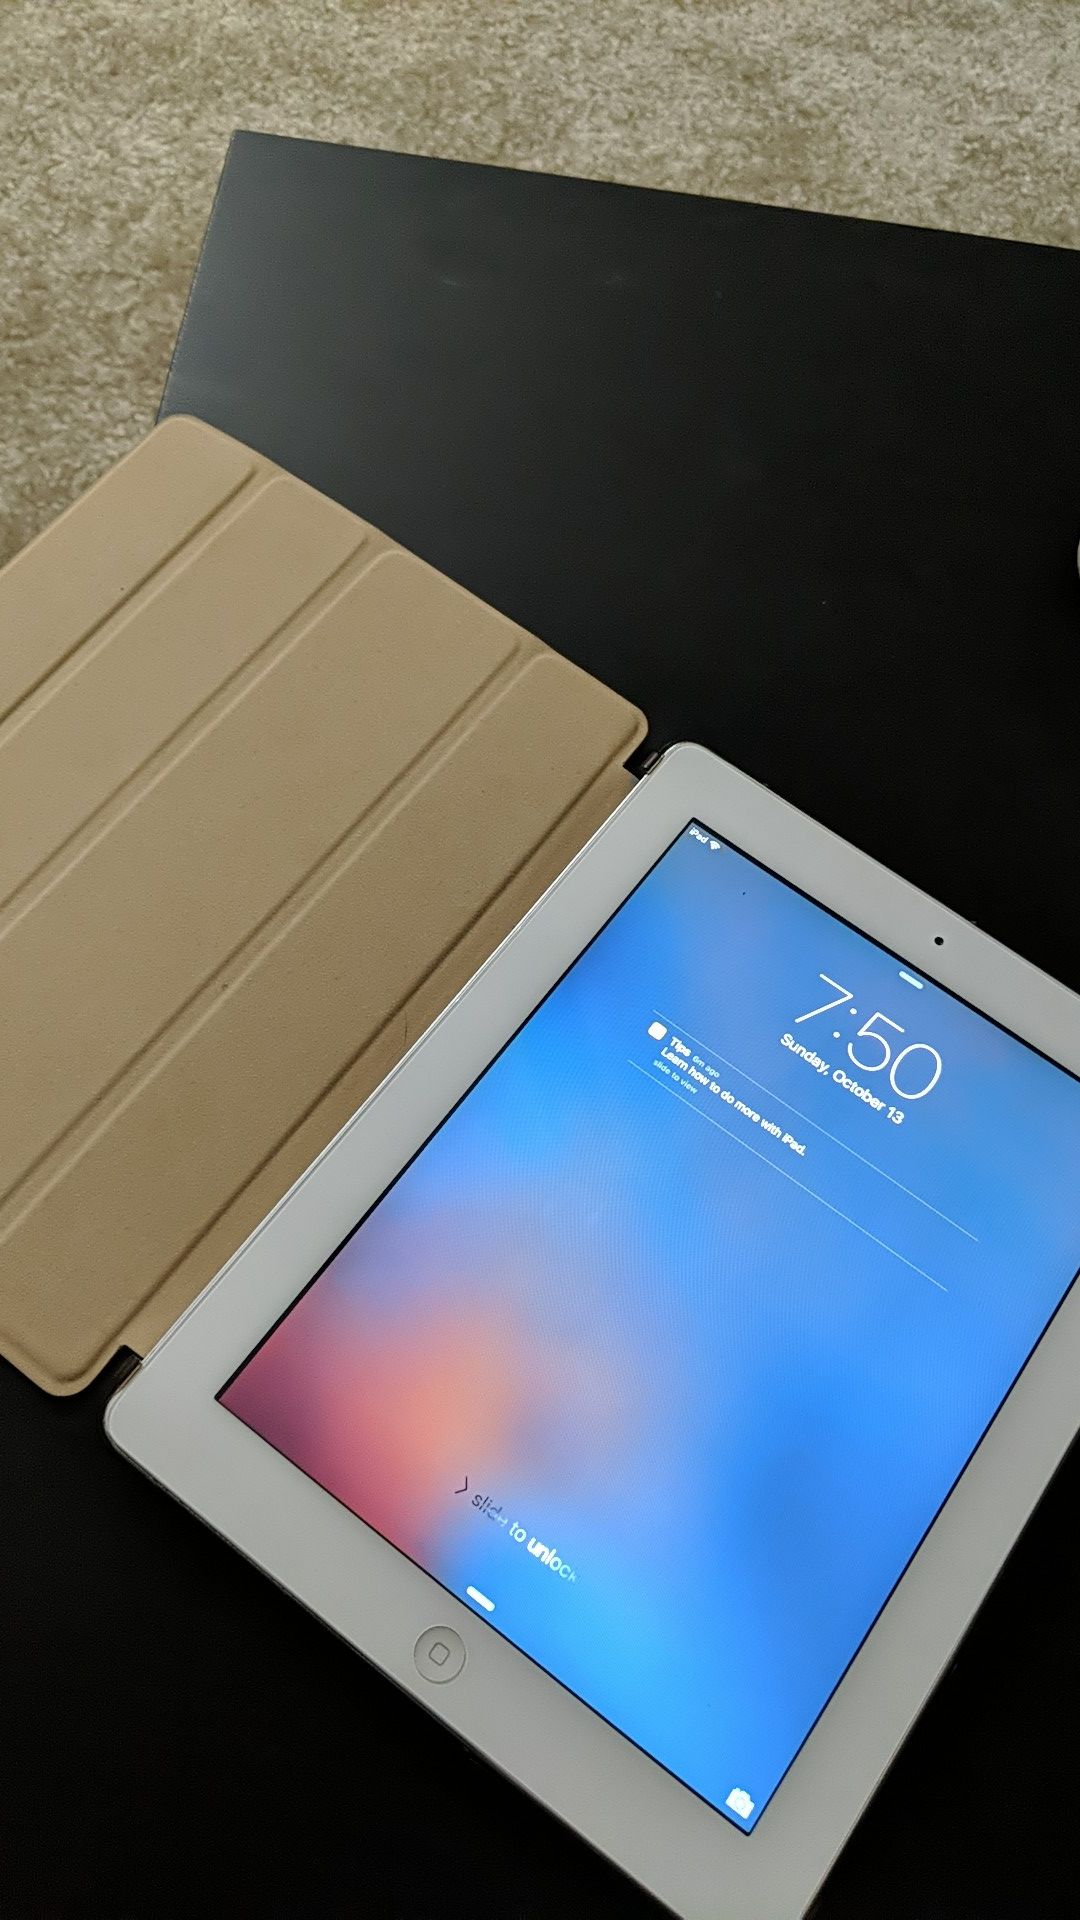 iPad 2 - Wifi Color, White Capacity: 32Gb (27.7 GB Available)